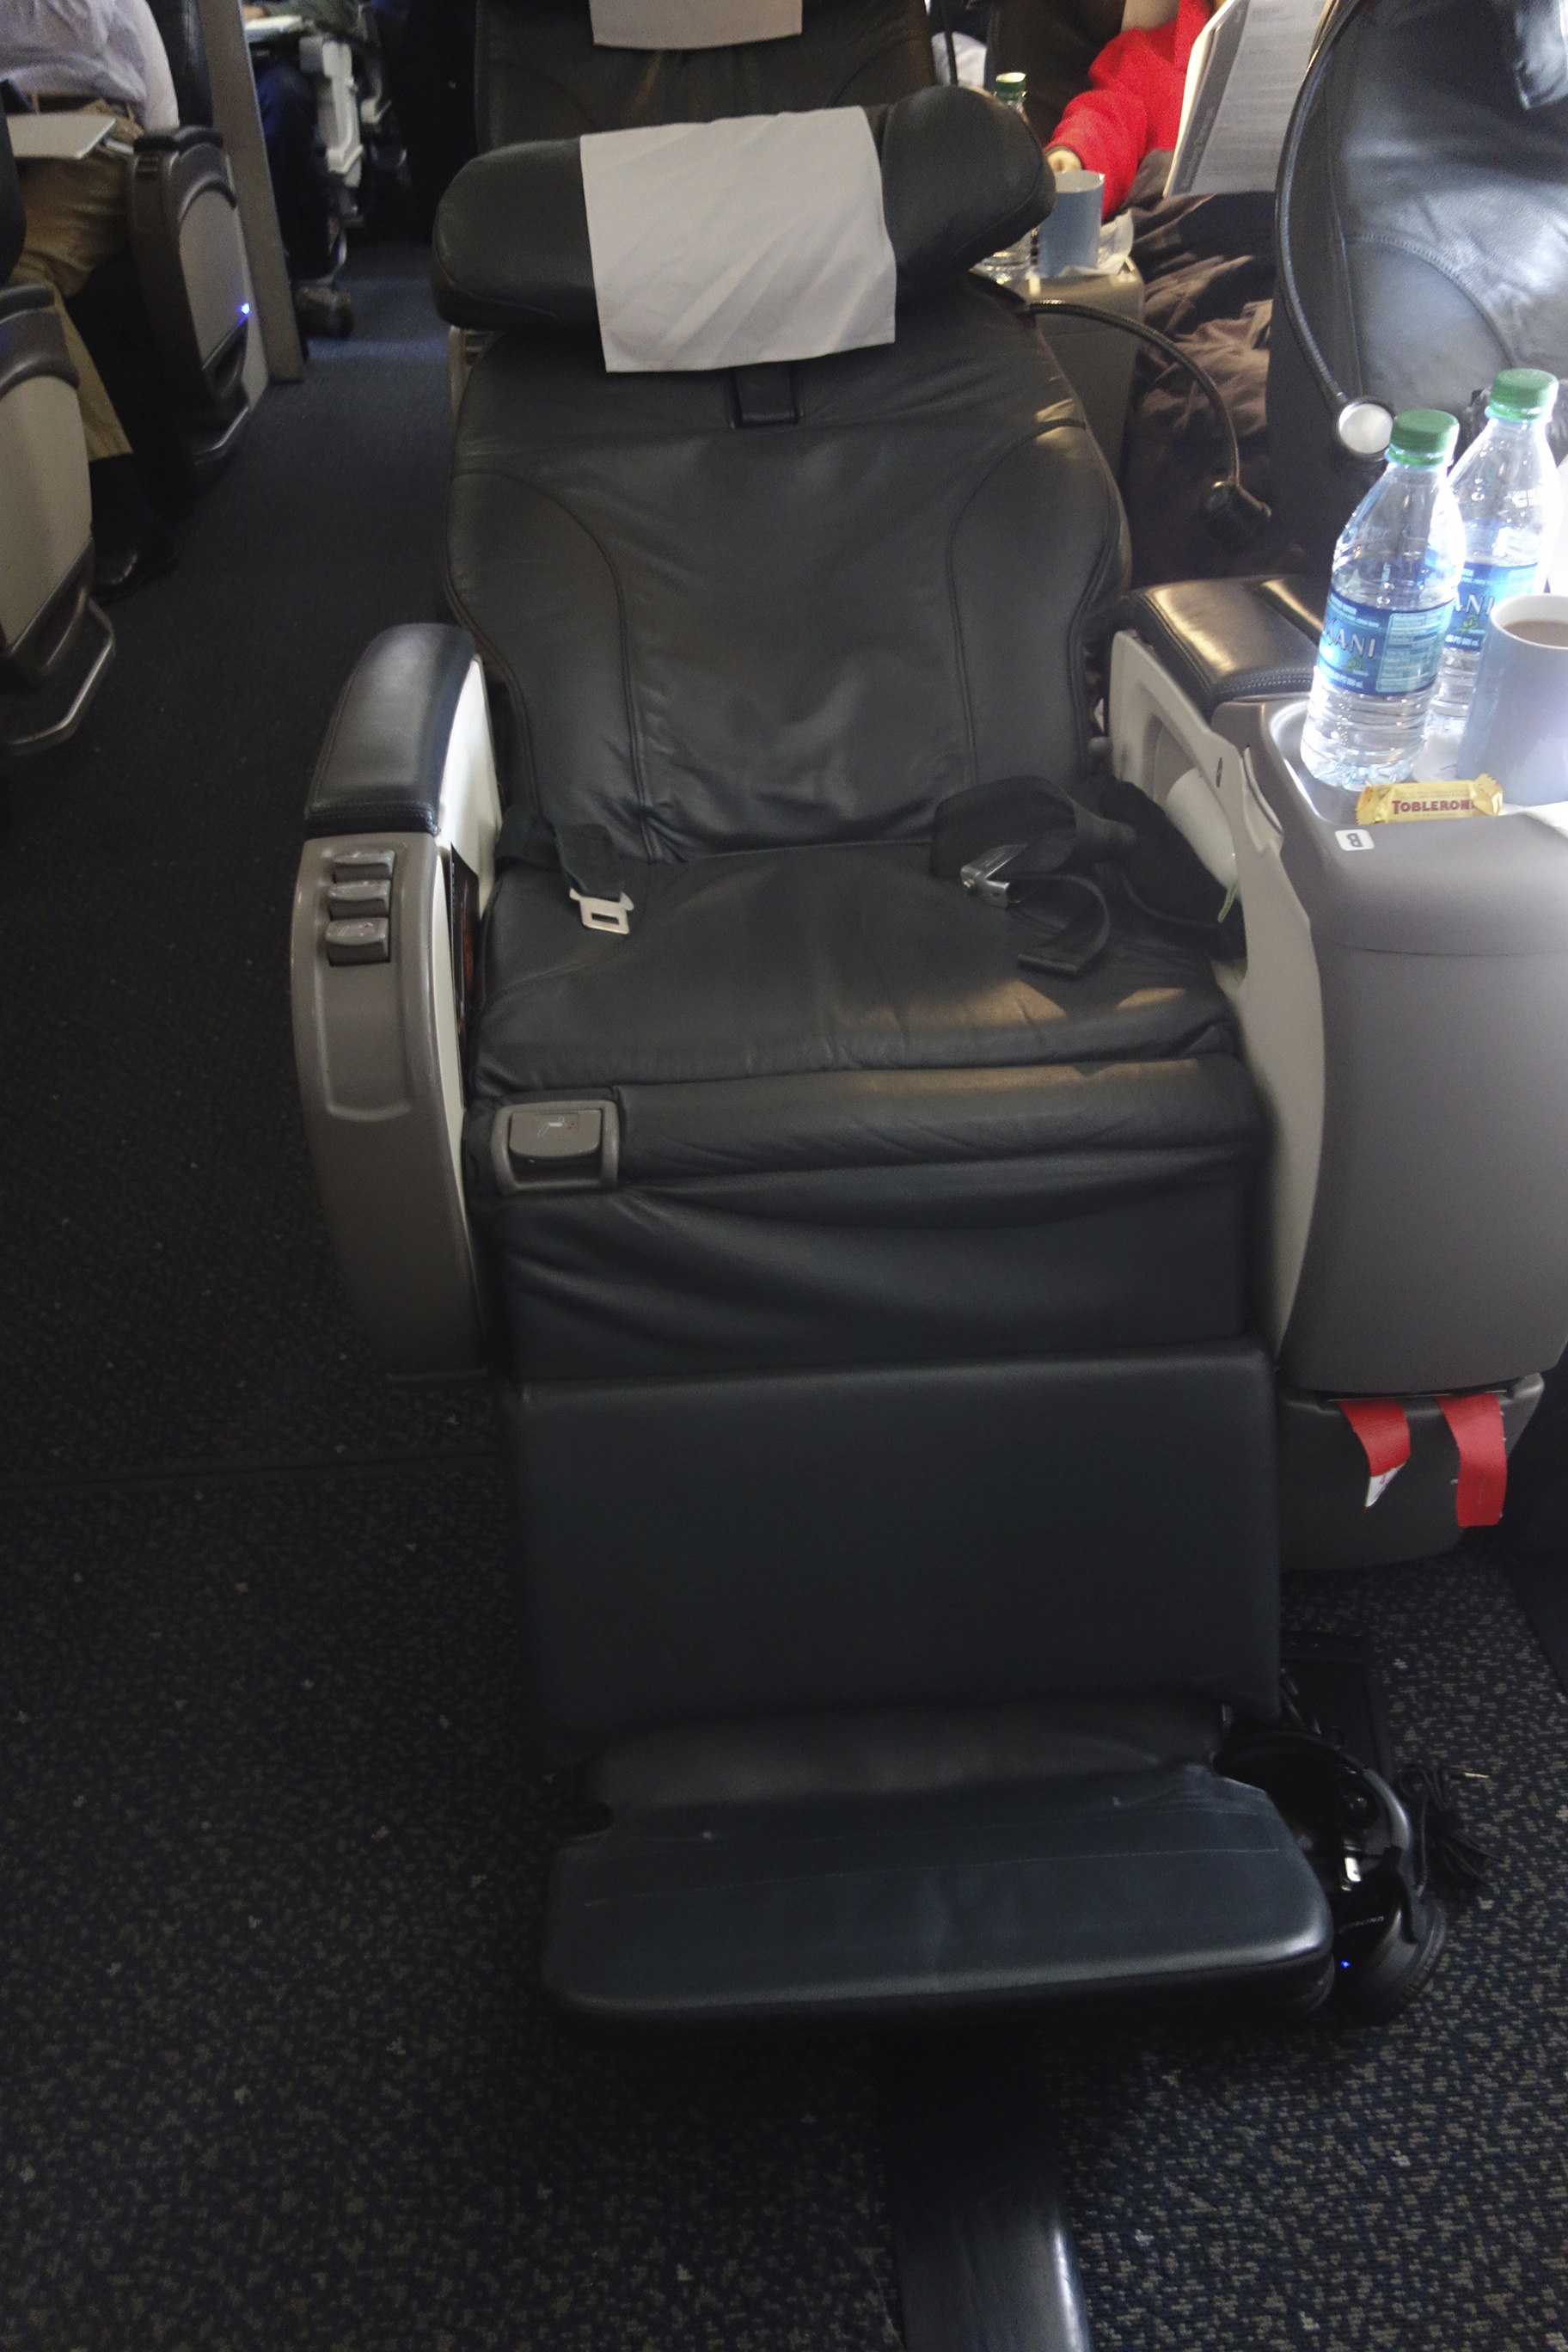 Seat 9B in reclined position